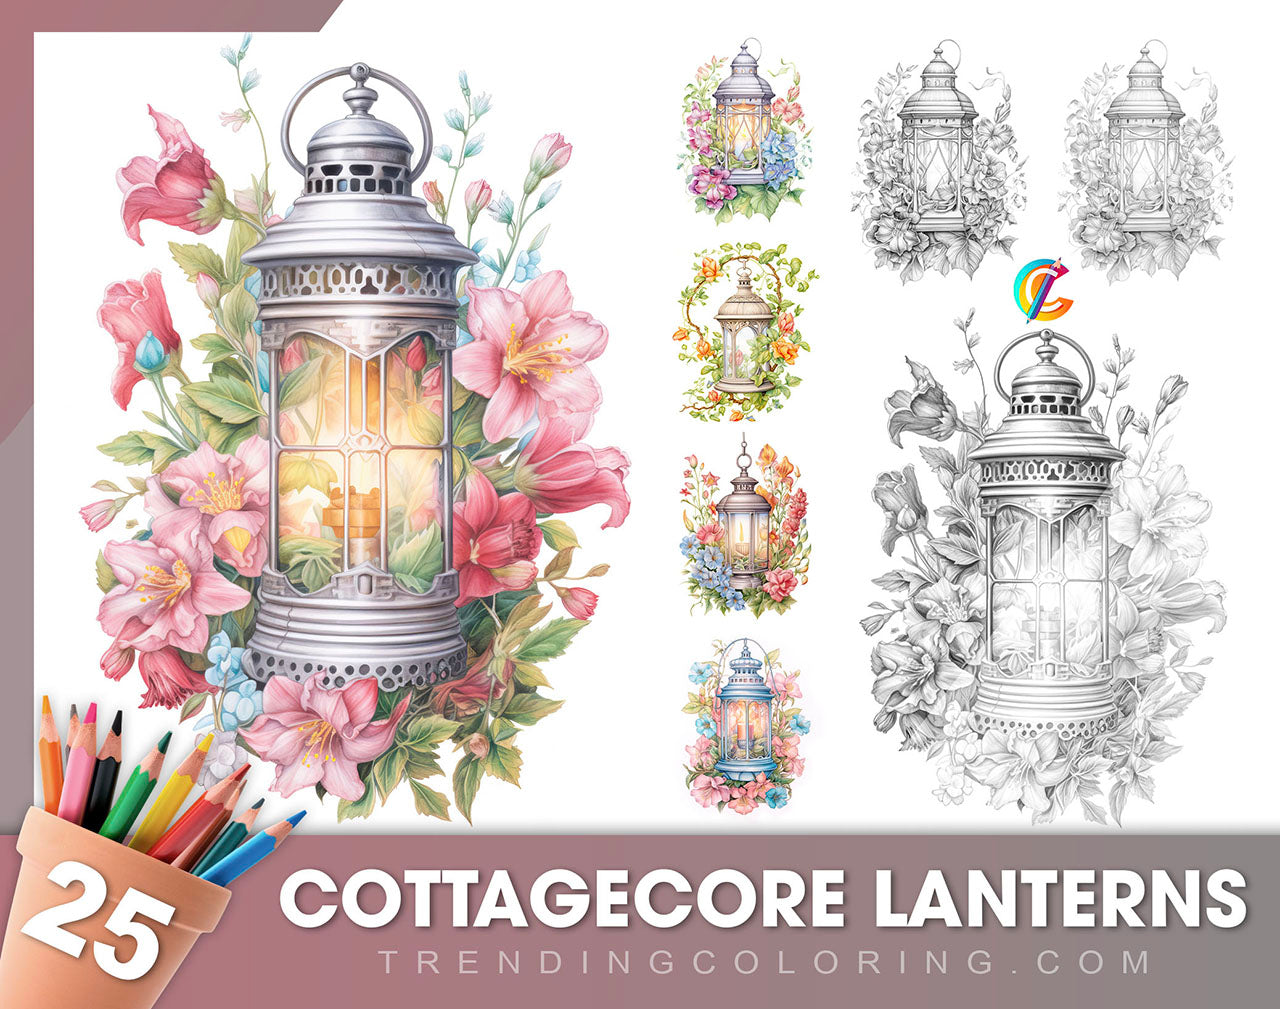 25 Cottagecore Lanterns Grayscale Coloring Pages - Instant Download - Printable Dark/Light